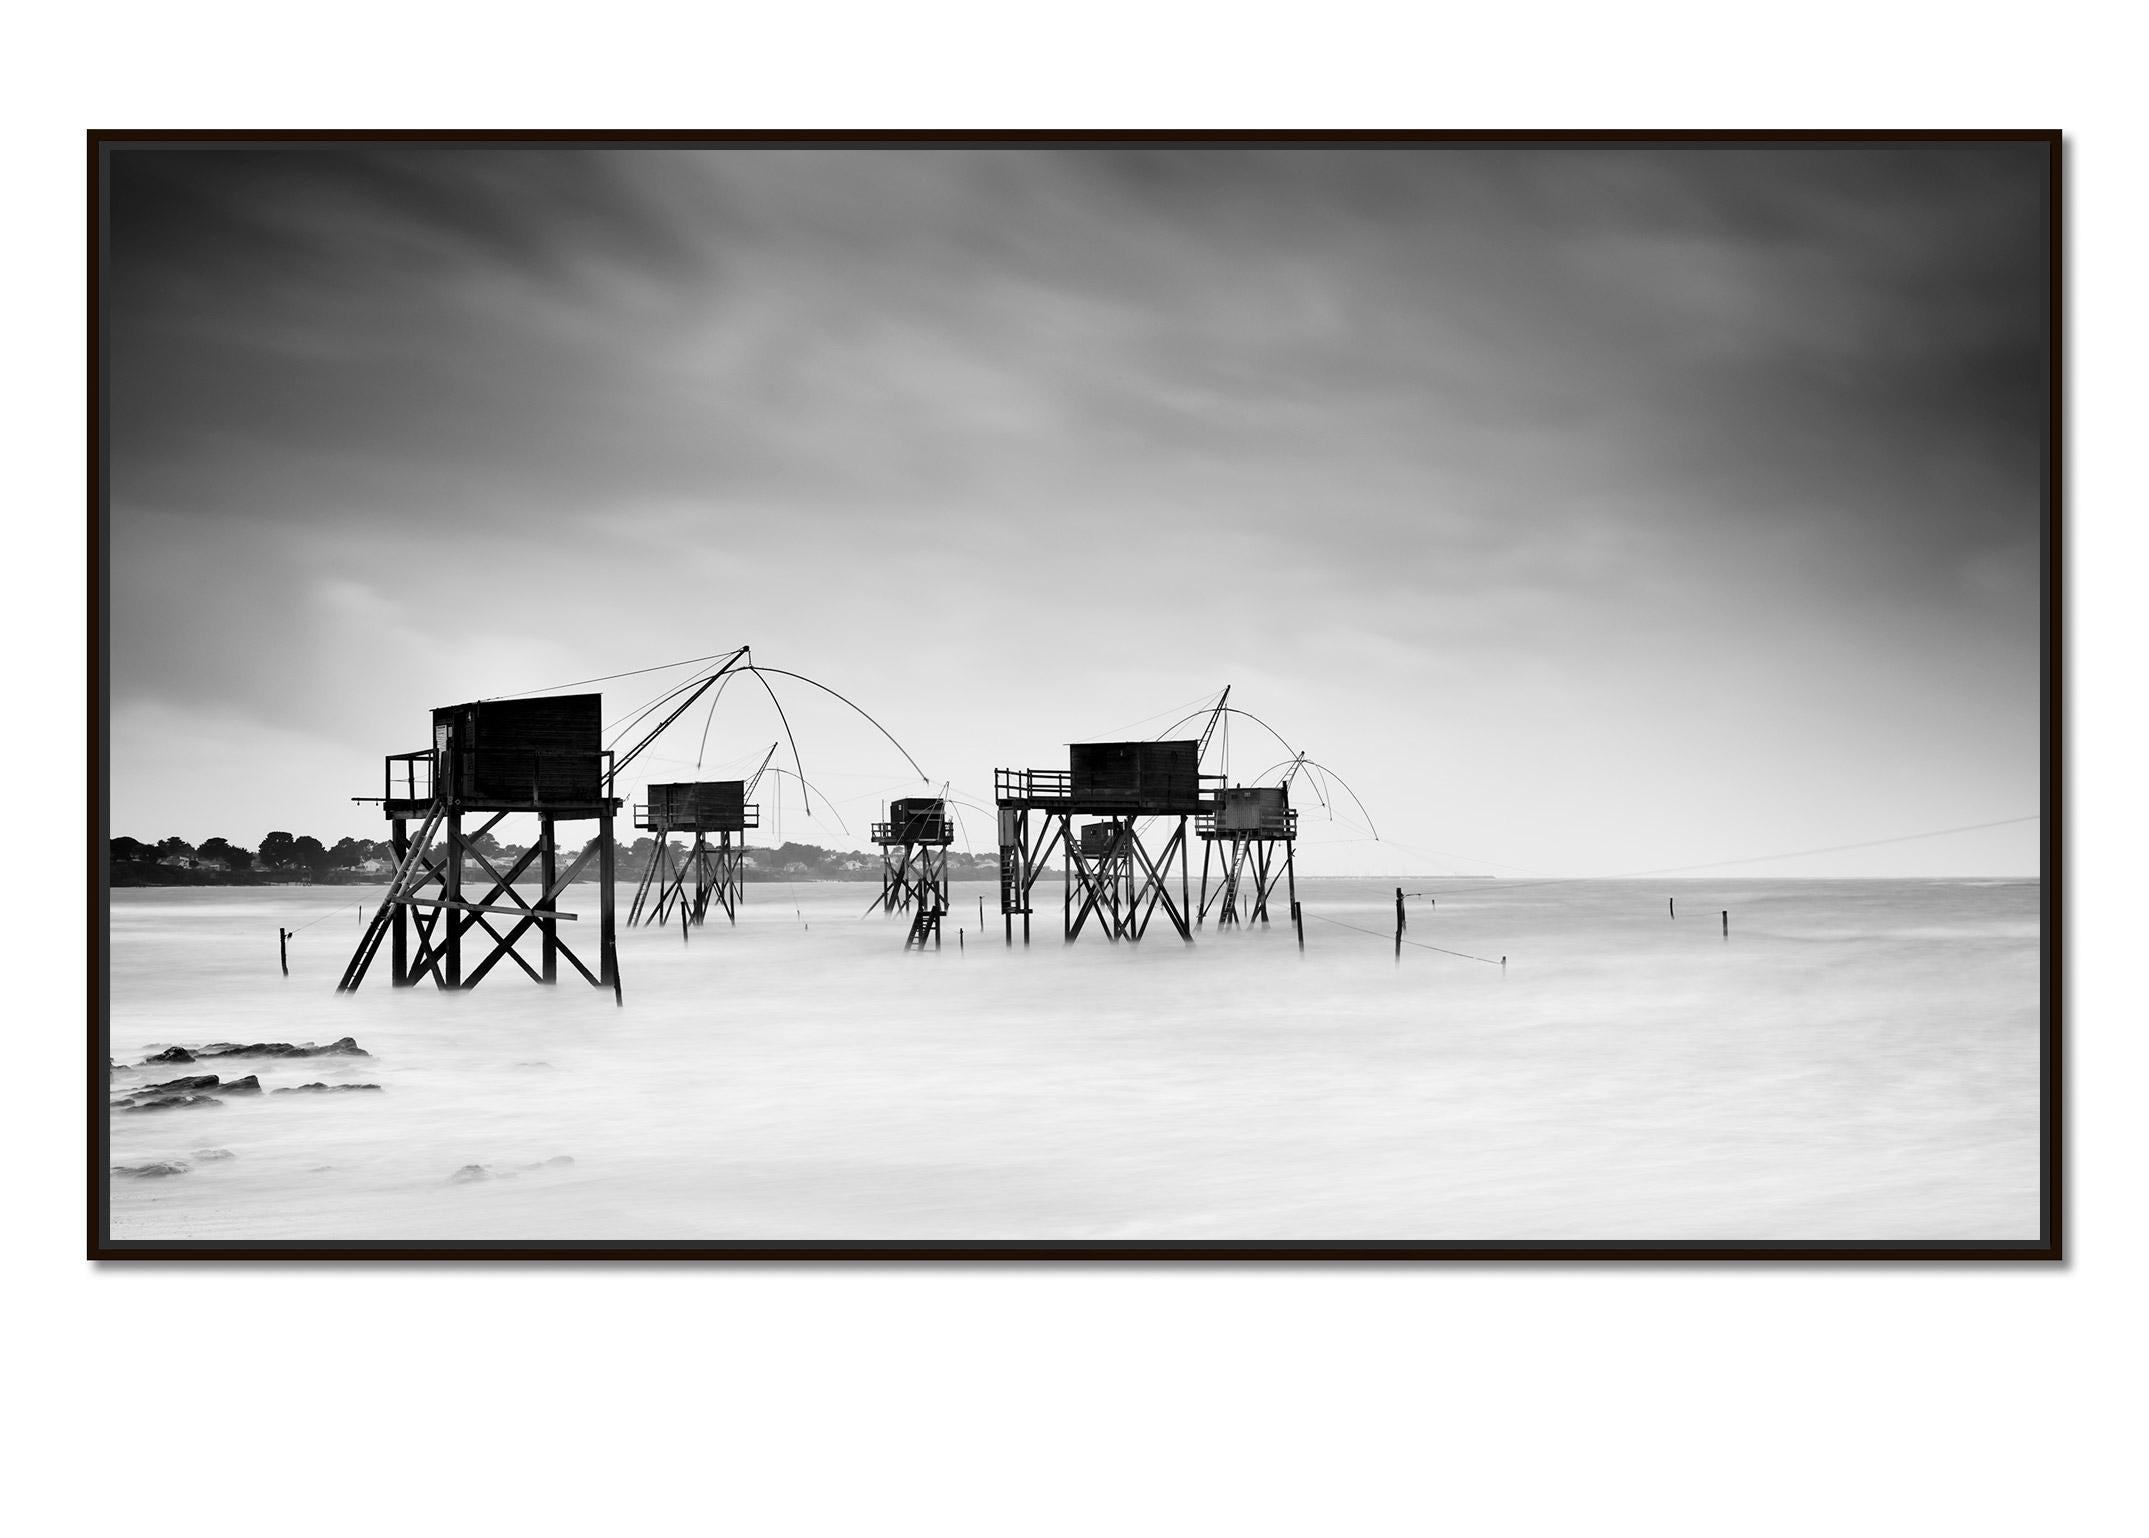 Fishing Hut on Stilts Panorama, black and white landscape fine art photography  - Contemporary Photograph by Gerald Berghammer